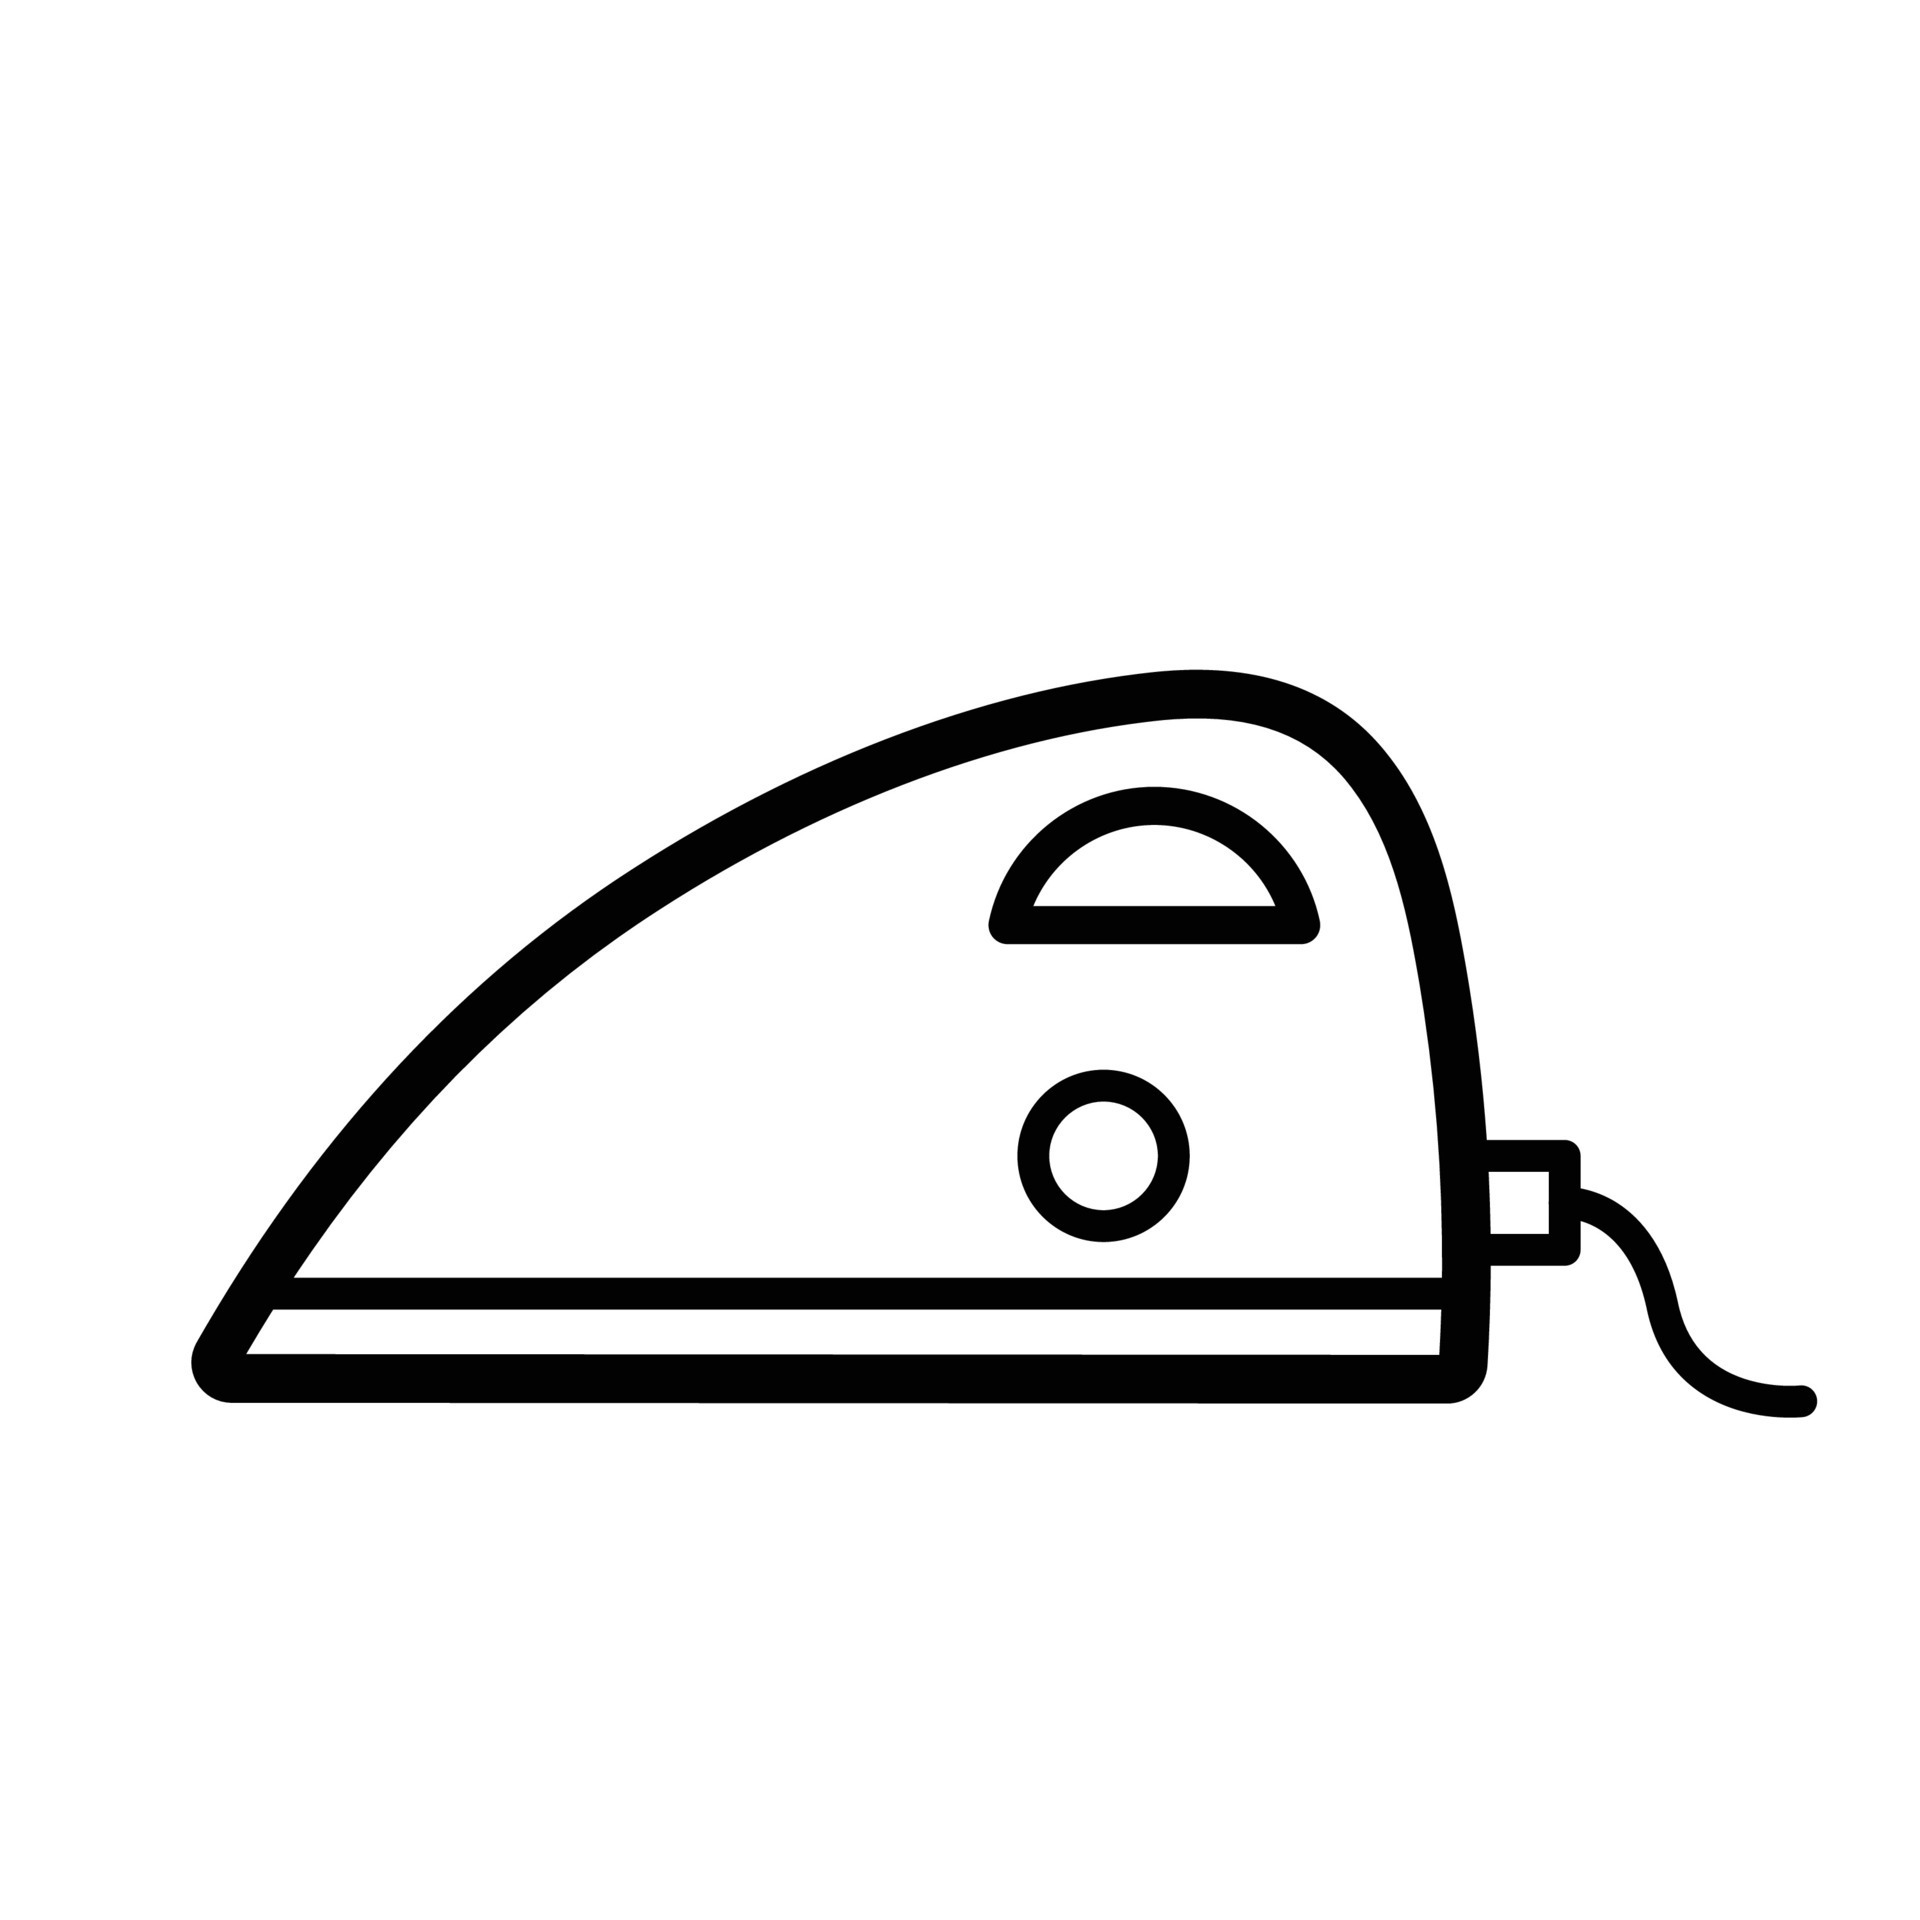 Sketch hand drawn of steam iron Royalty Free Vector Image